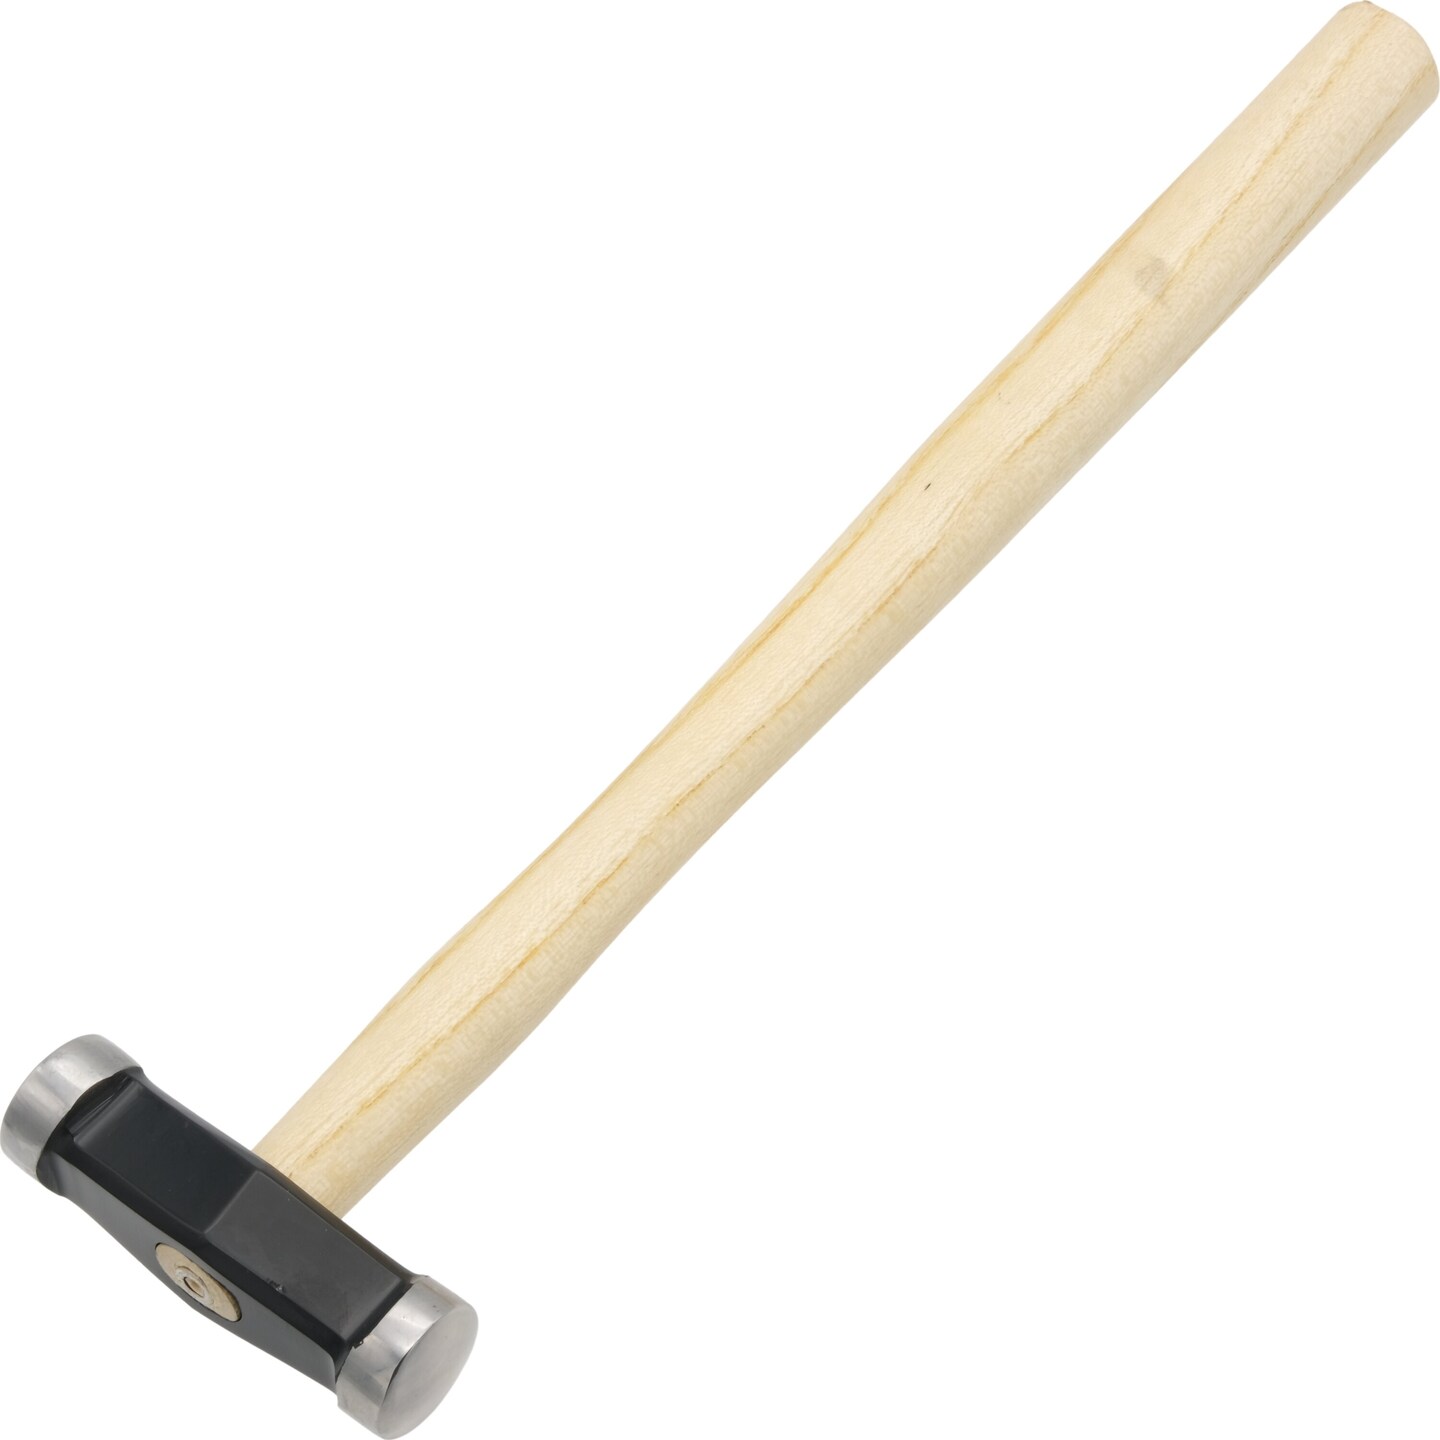 Two Nylon Jewelers Hammer Mallet Craft Tools, 1 Face and a 1.5 Face